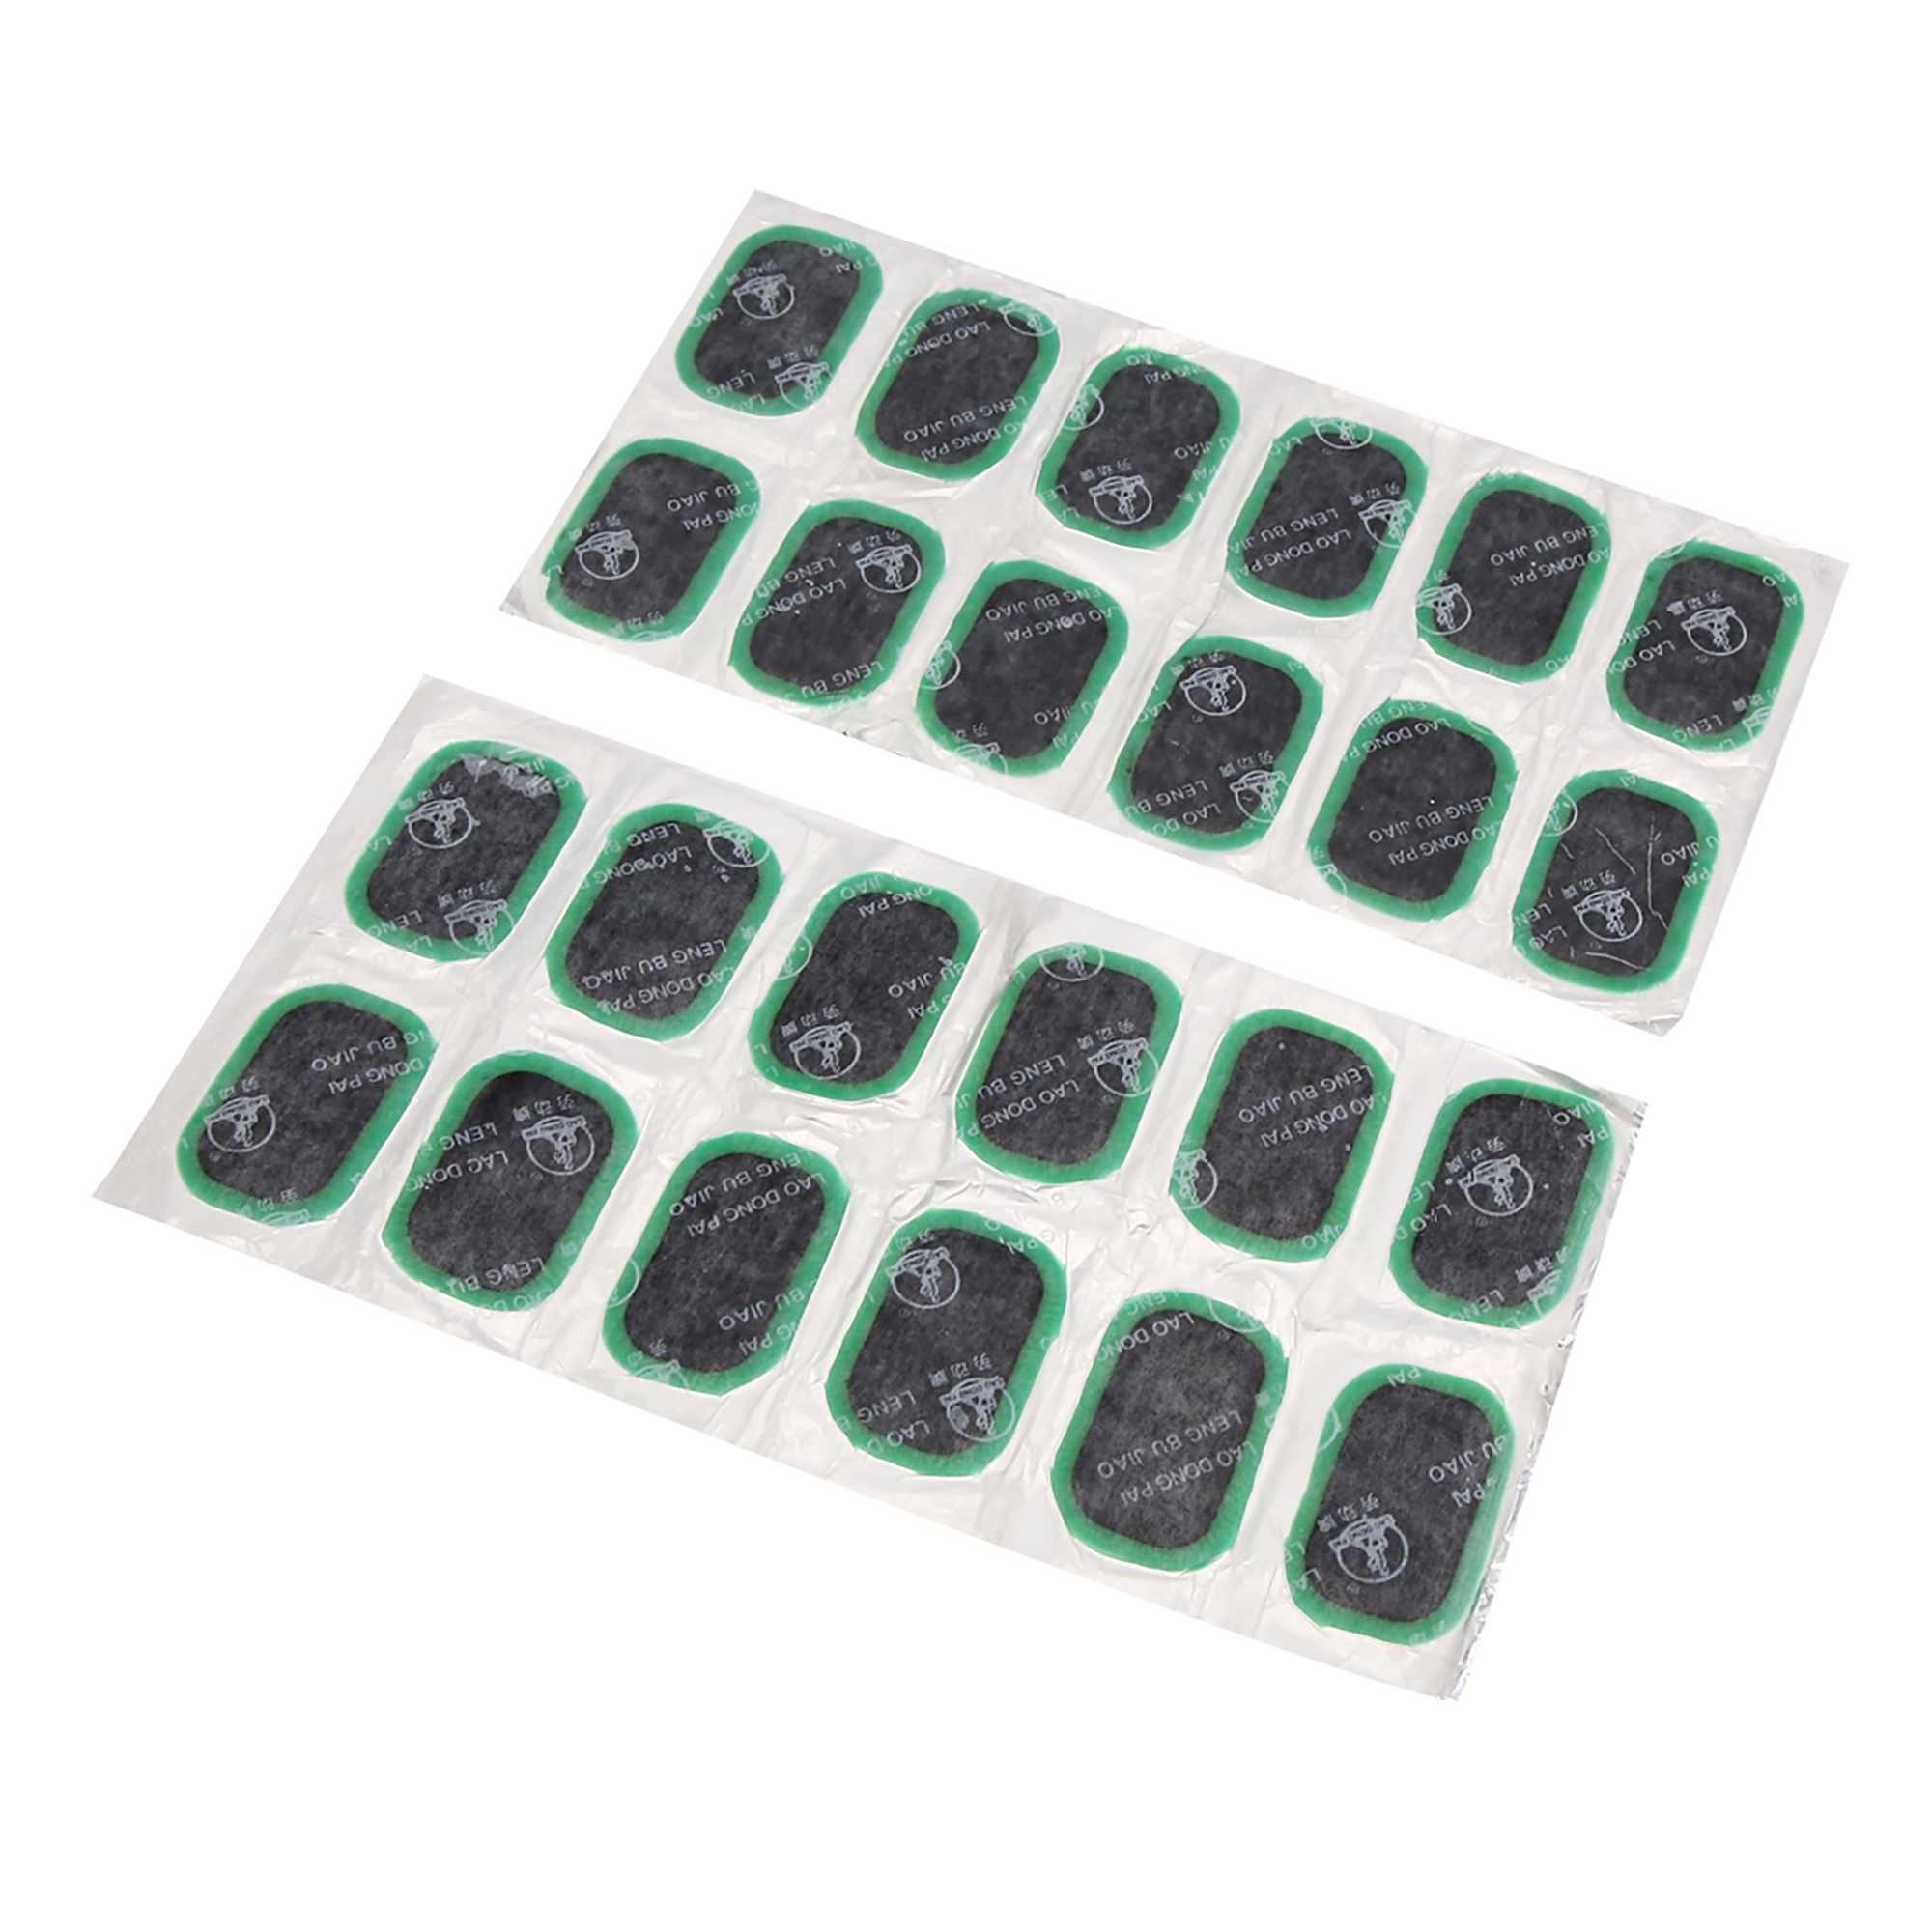 Unique Bargains 24pcs Green Motorcycle Car Tyre Puncture Patches Tire Repair Tool 52 x 34mm